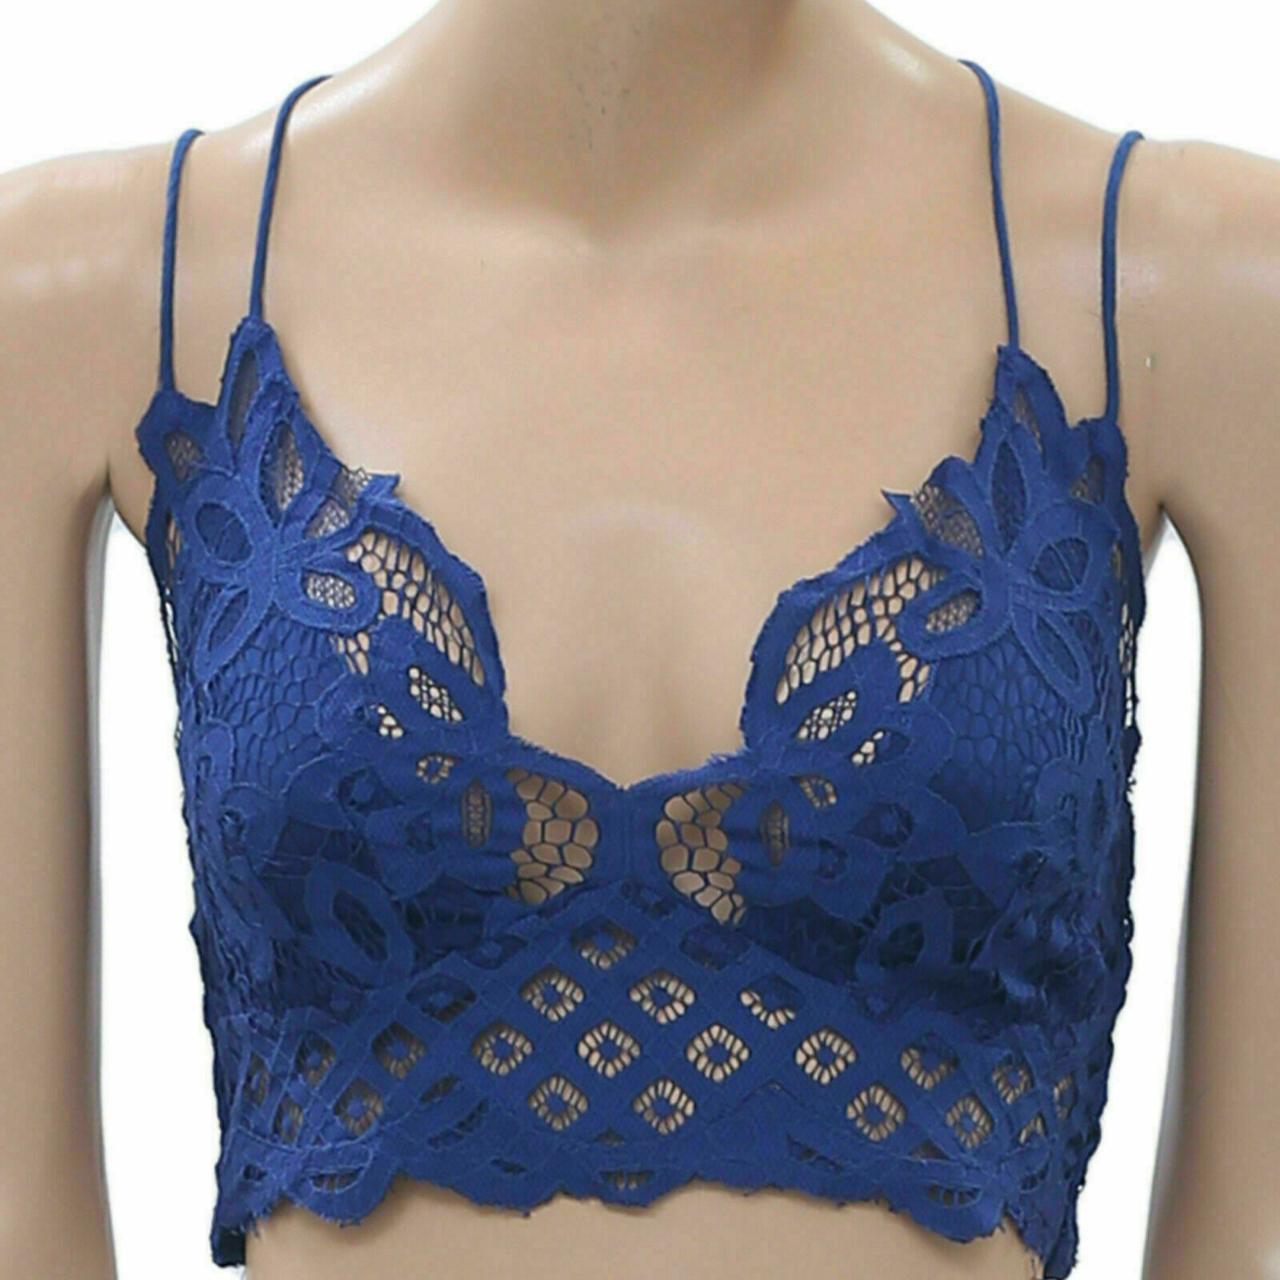 Free People FP One Adella Bralette Embroidered Lace - Depop